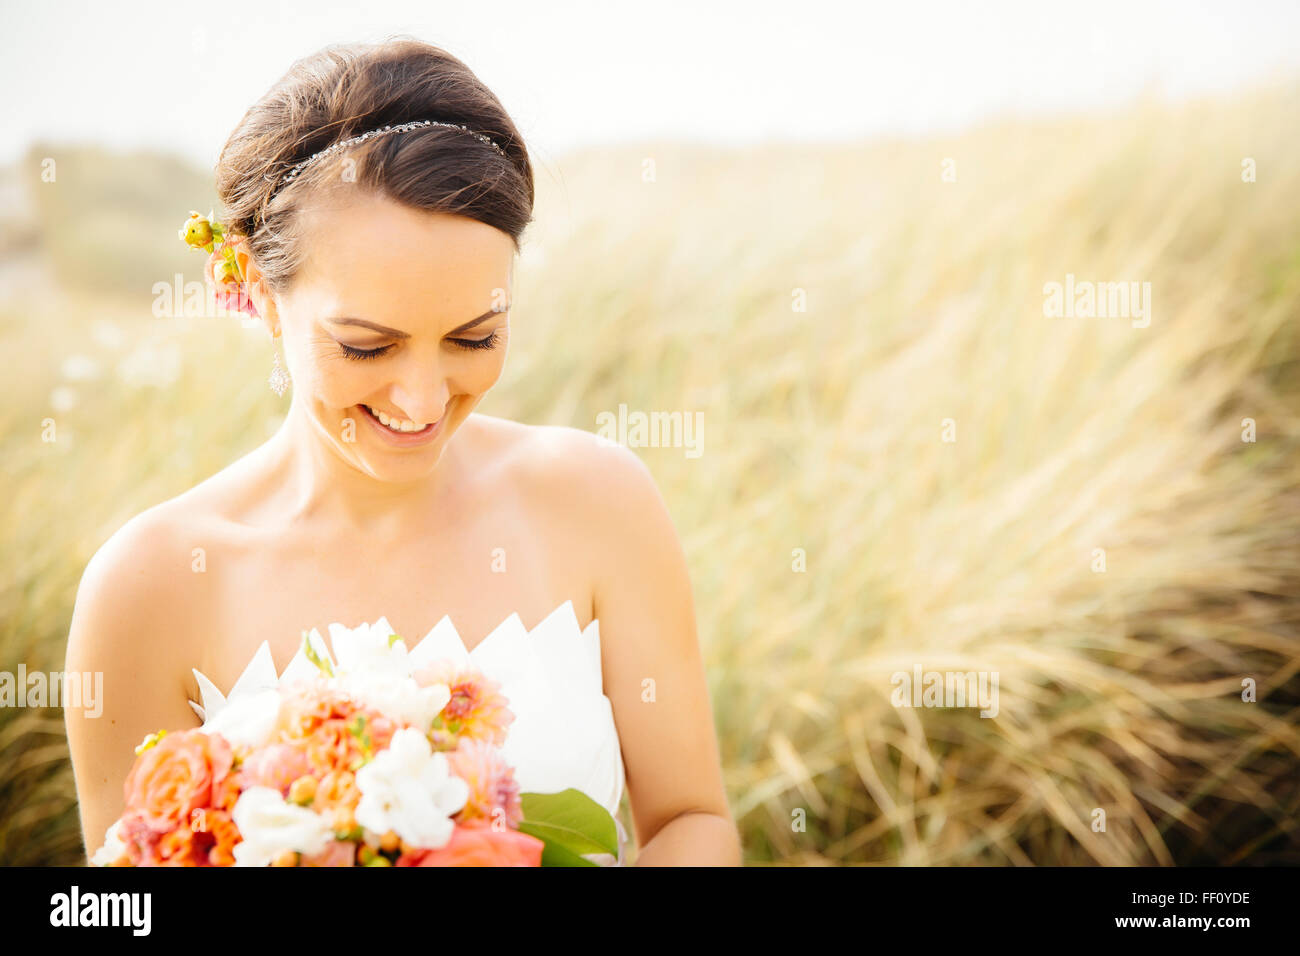 Caucasian bride standing in grass Banque D'Images